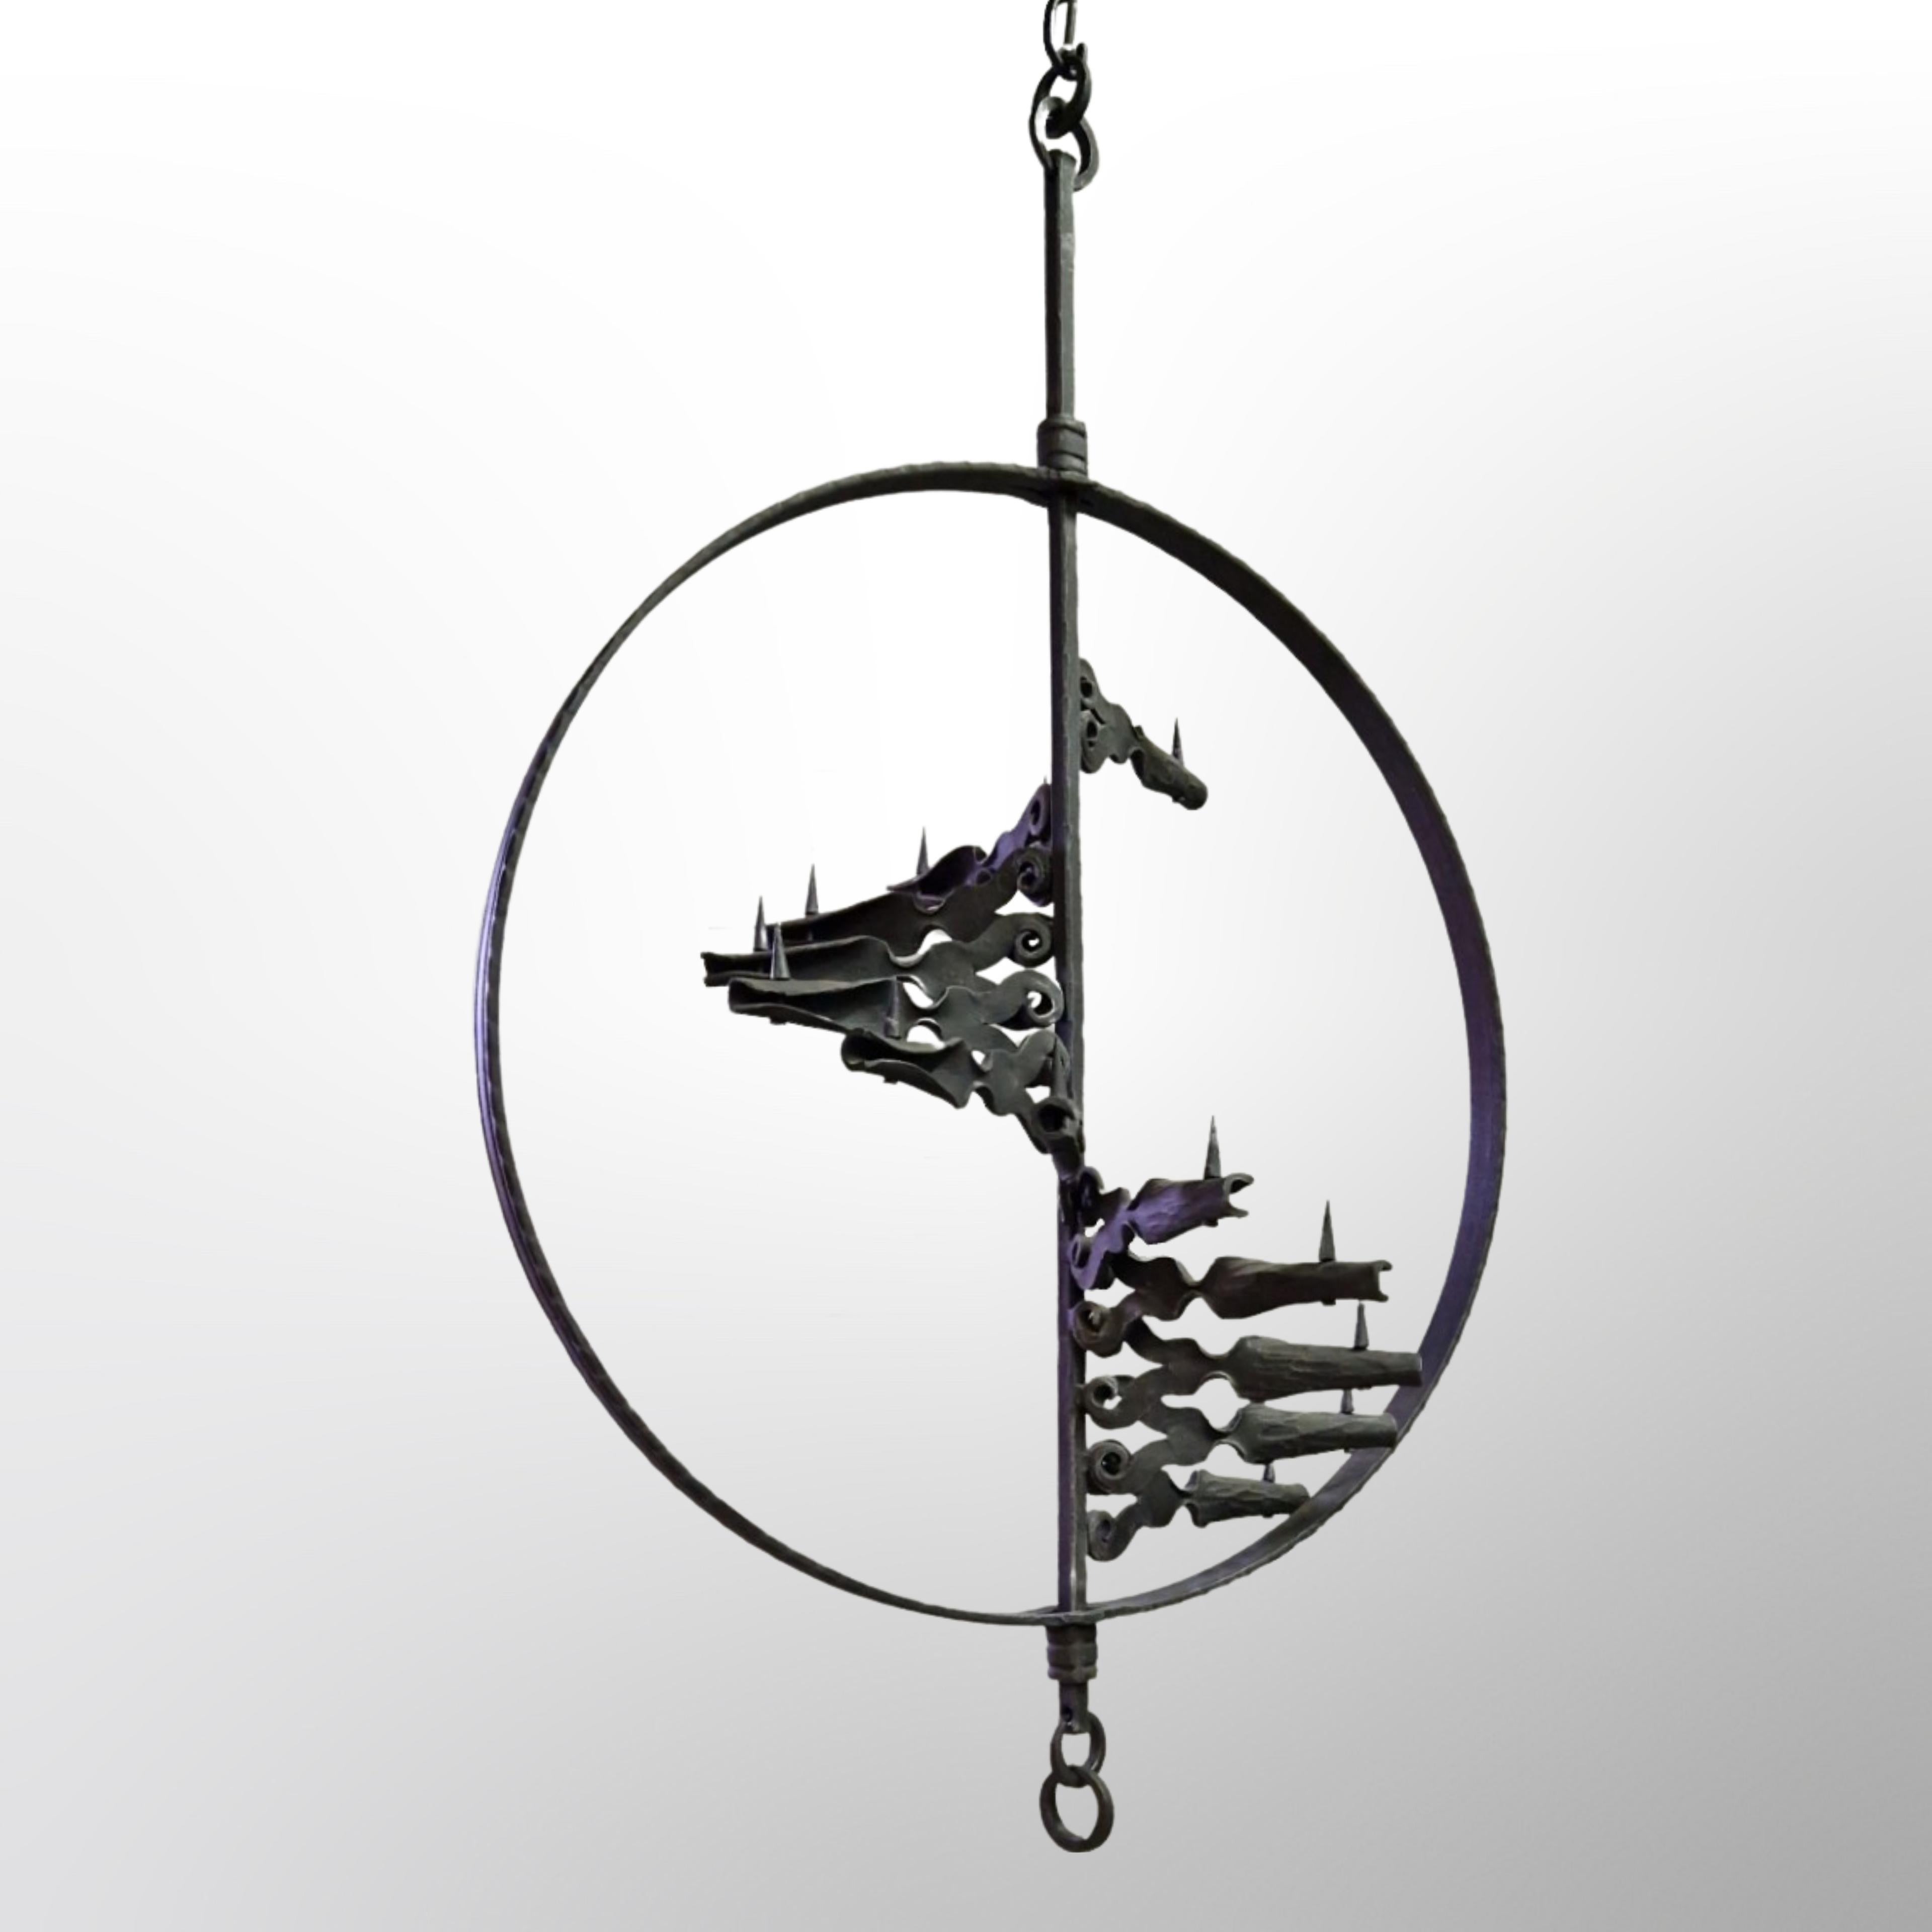 Large hanging candle holder in the arts and crafts style. It is made from solid cast iron. It has 13 arms set inside a ring and fixed to a central axis. The arms spiral down on the axis. Each arm holds one candle. The purple globe candles are